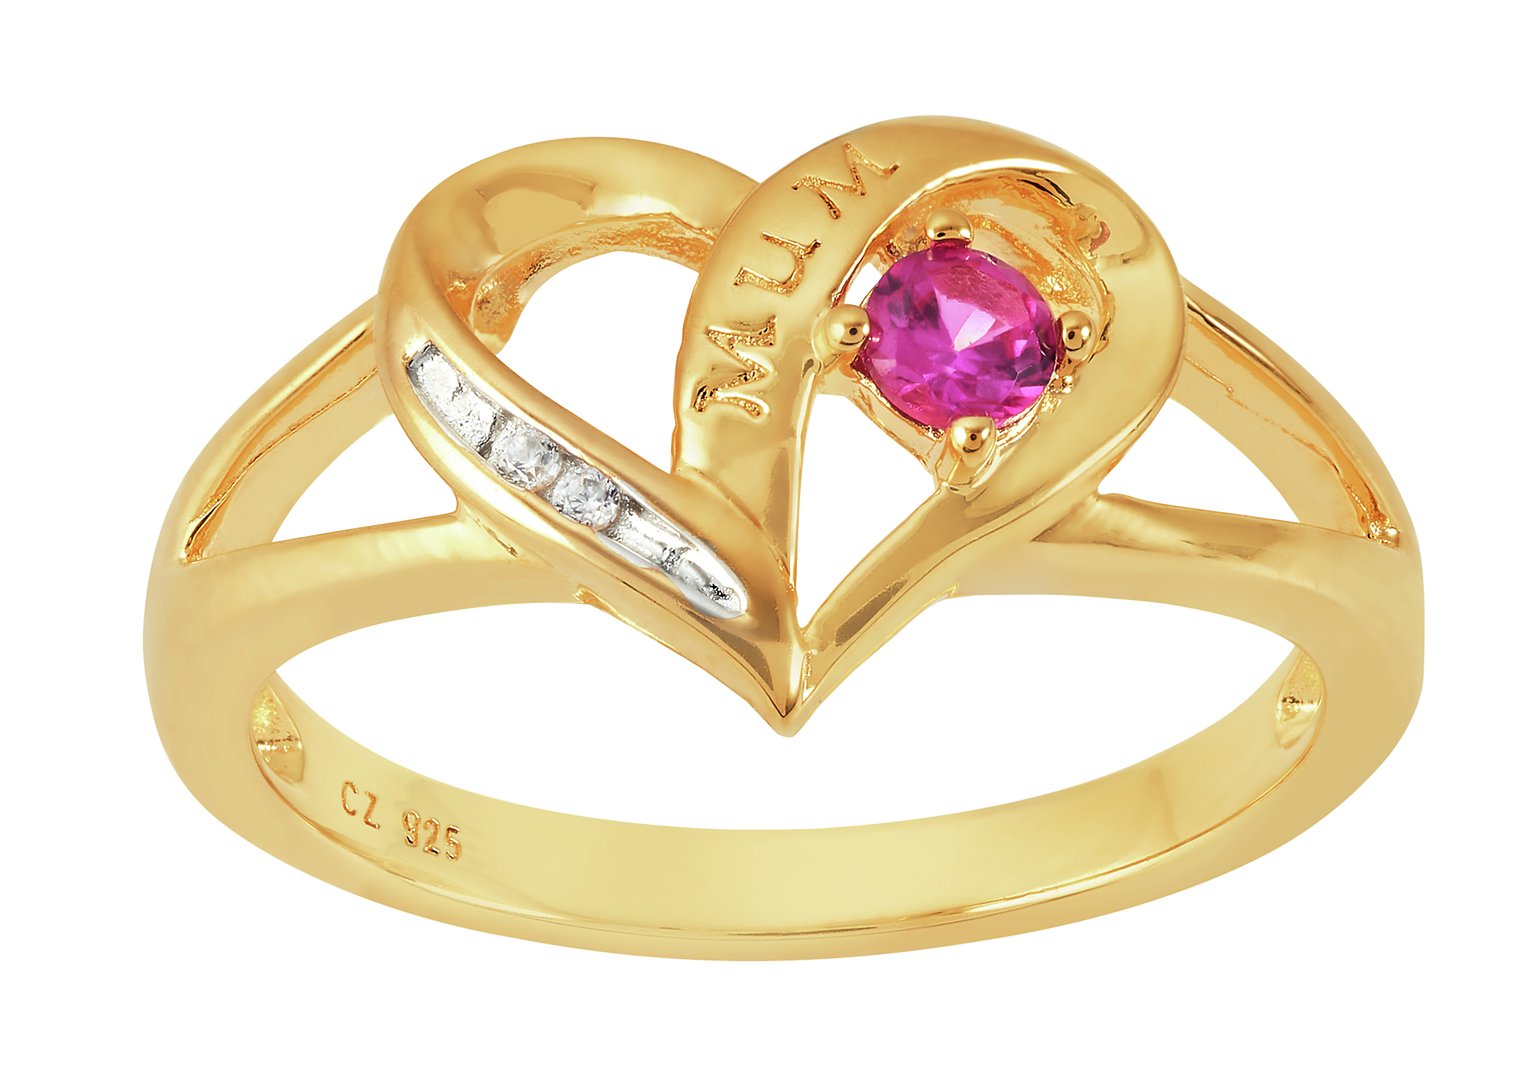 Moon & Back 9ct Gold Plated Heart Shaped Stone Set Ring Review